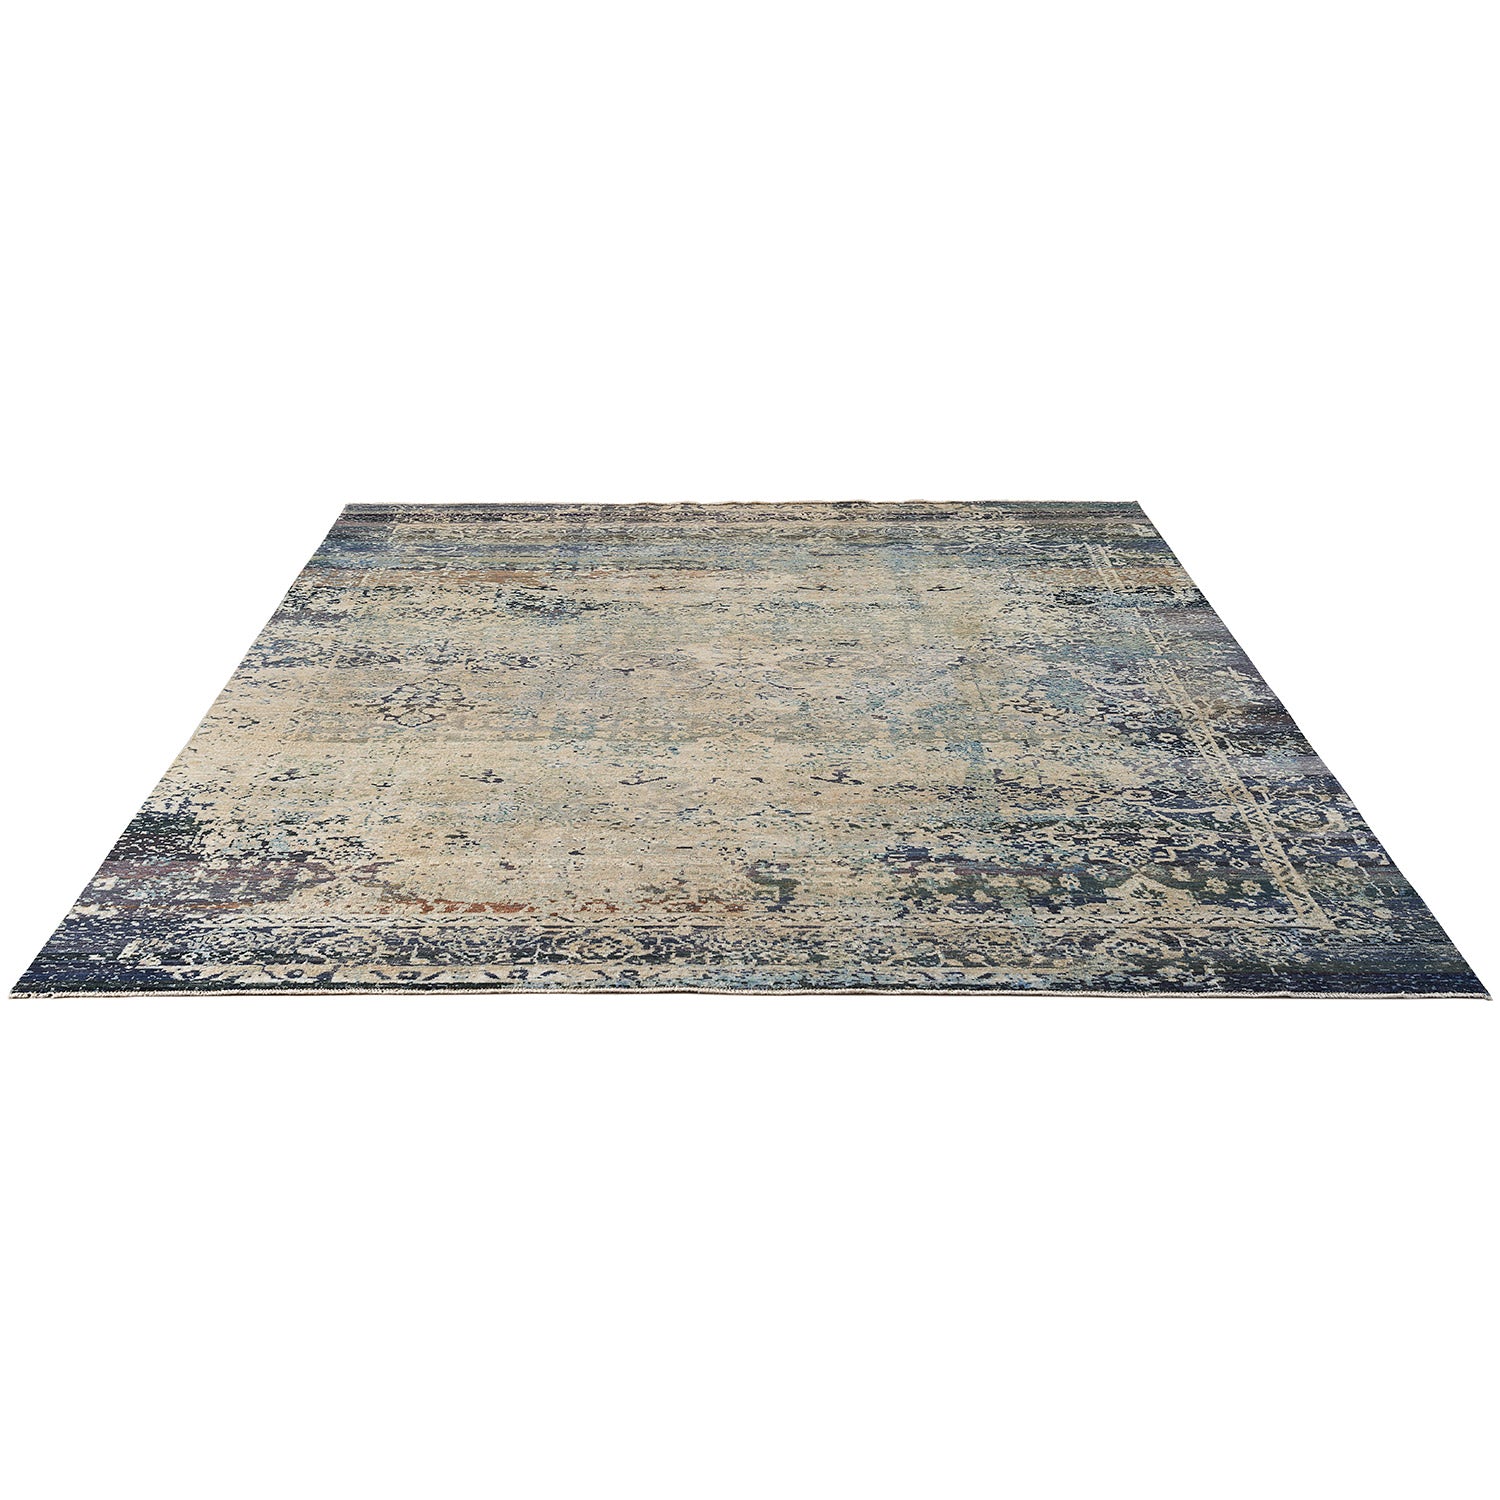 Vintage-style rectangular area rug with intricate faded design and border.